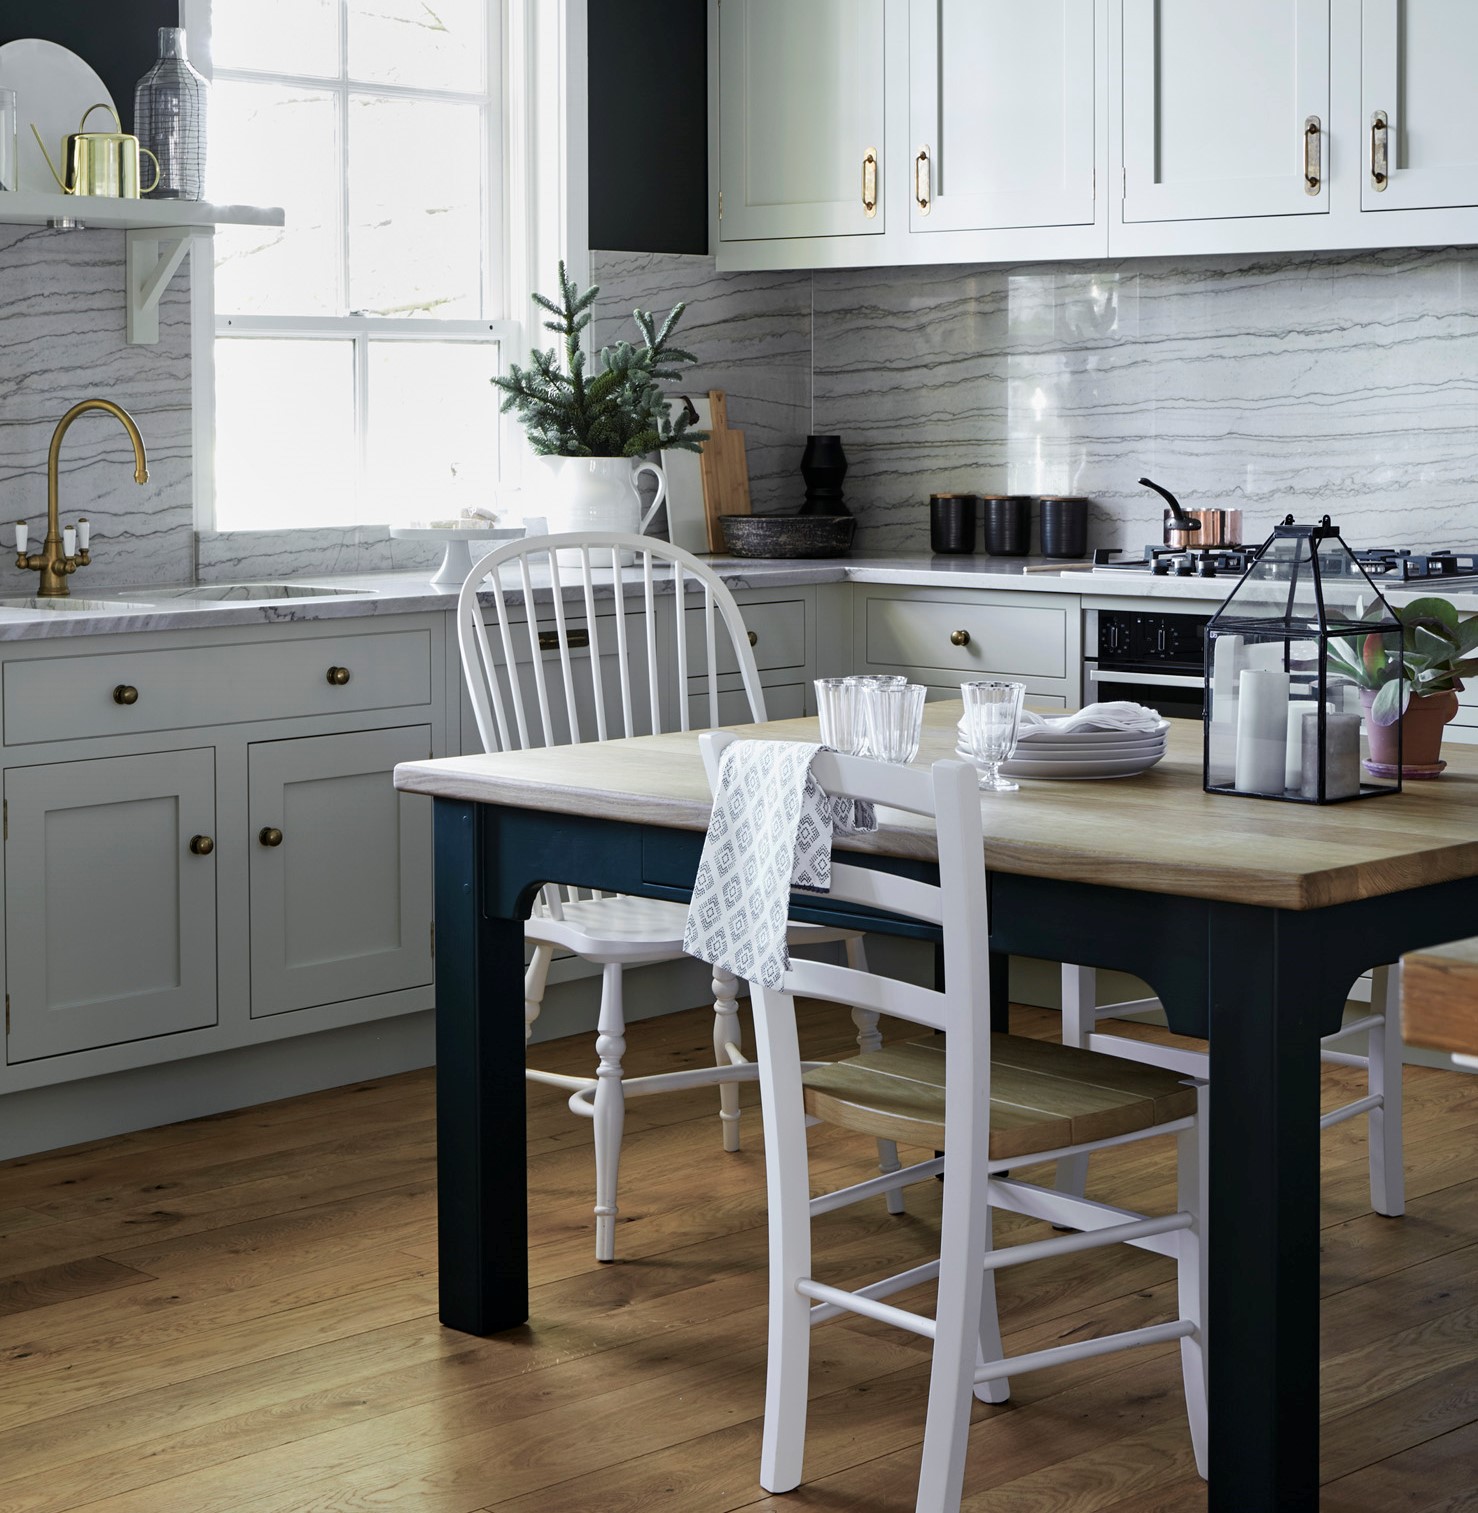 How To Design A Freestanding Kitchen   John Lewis of Hungerford